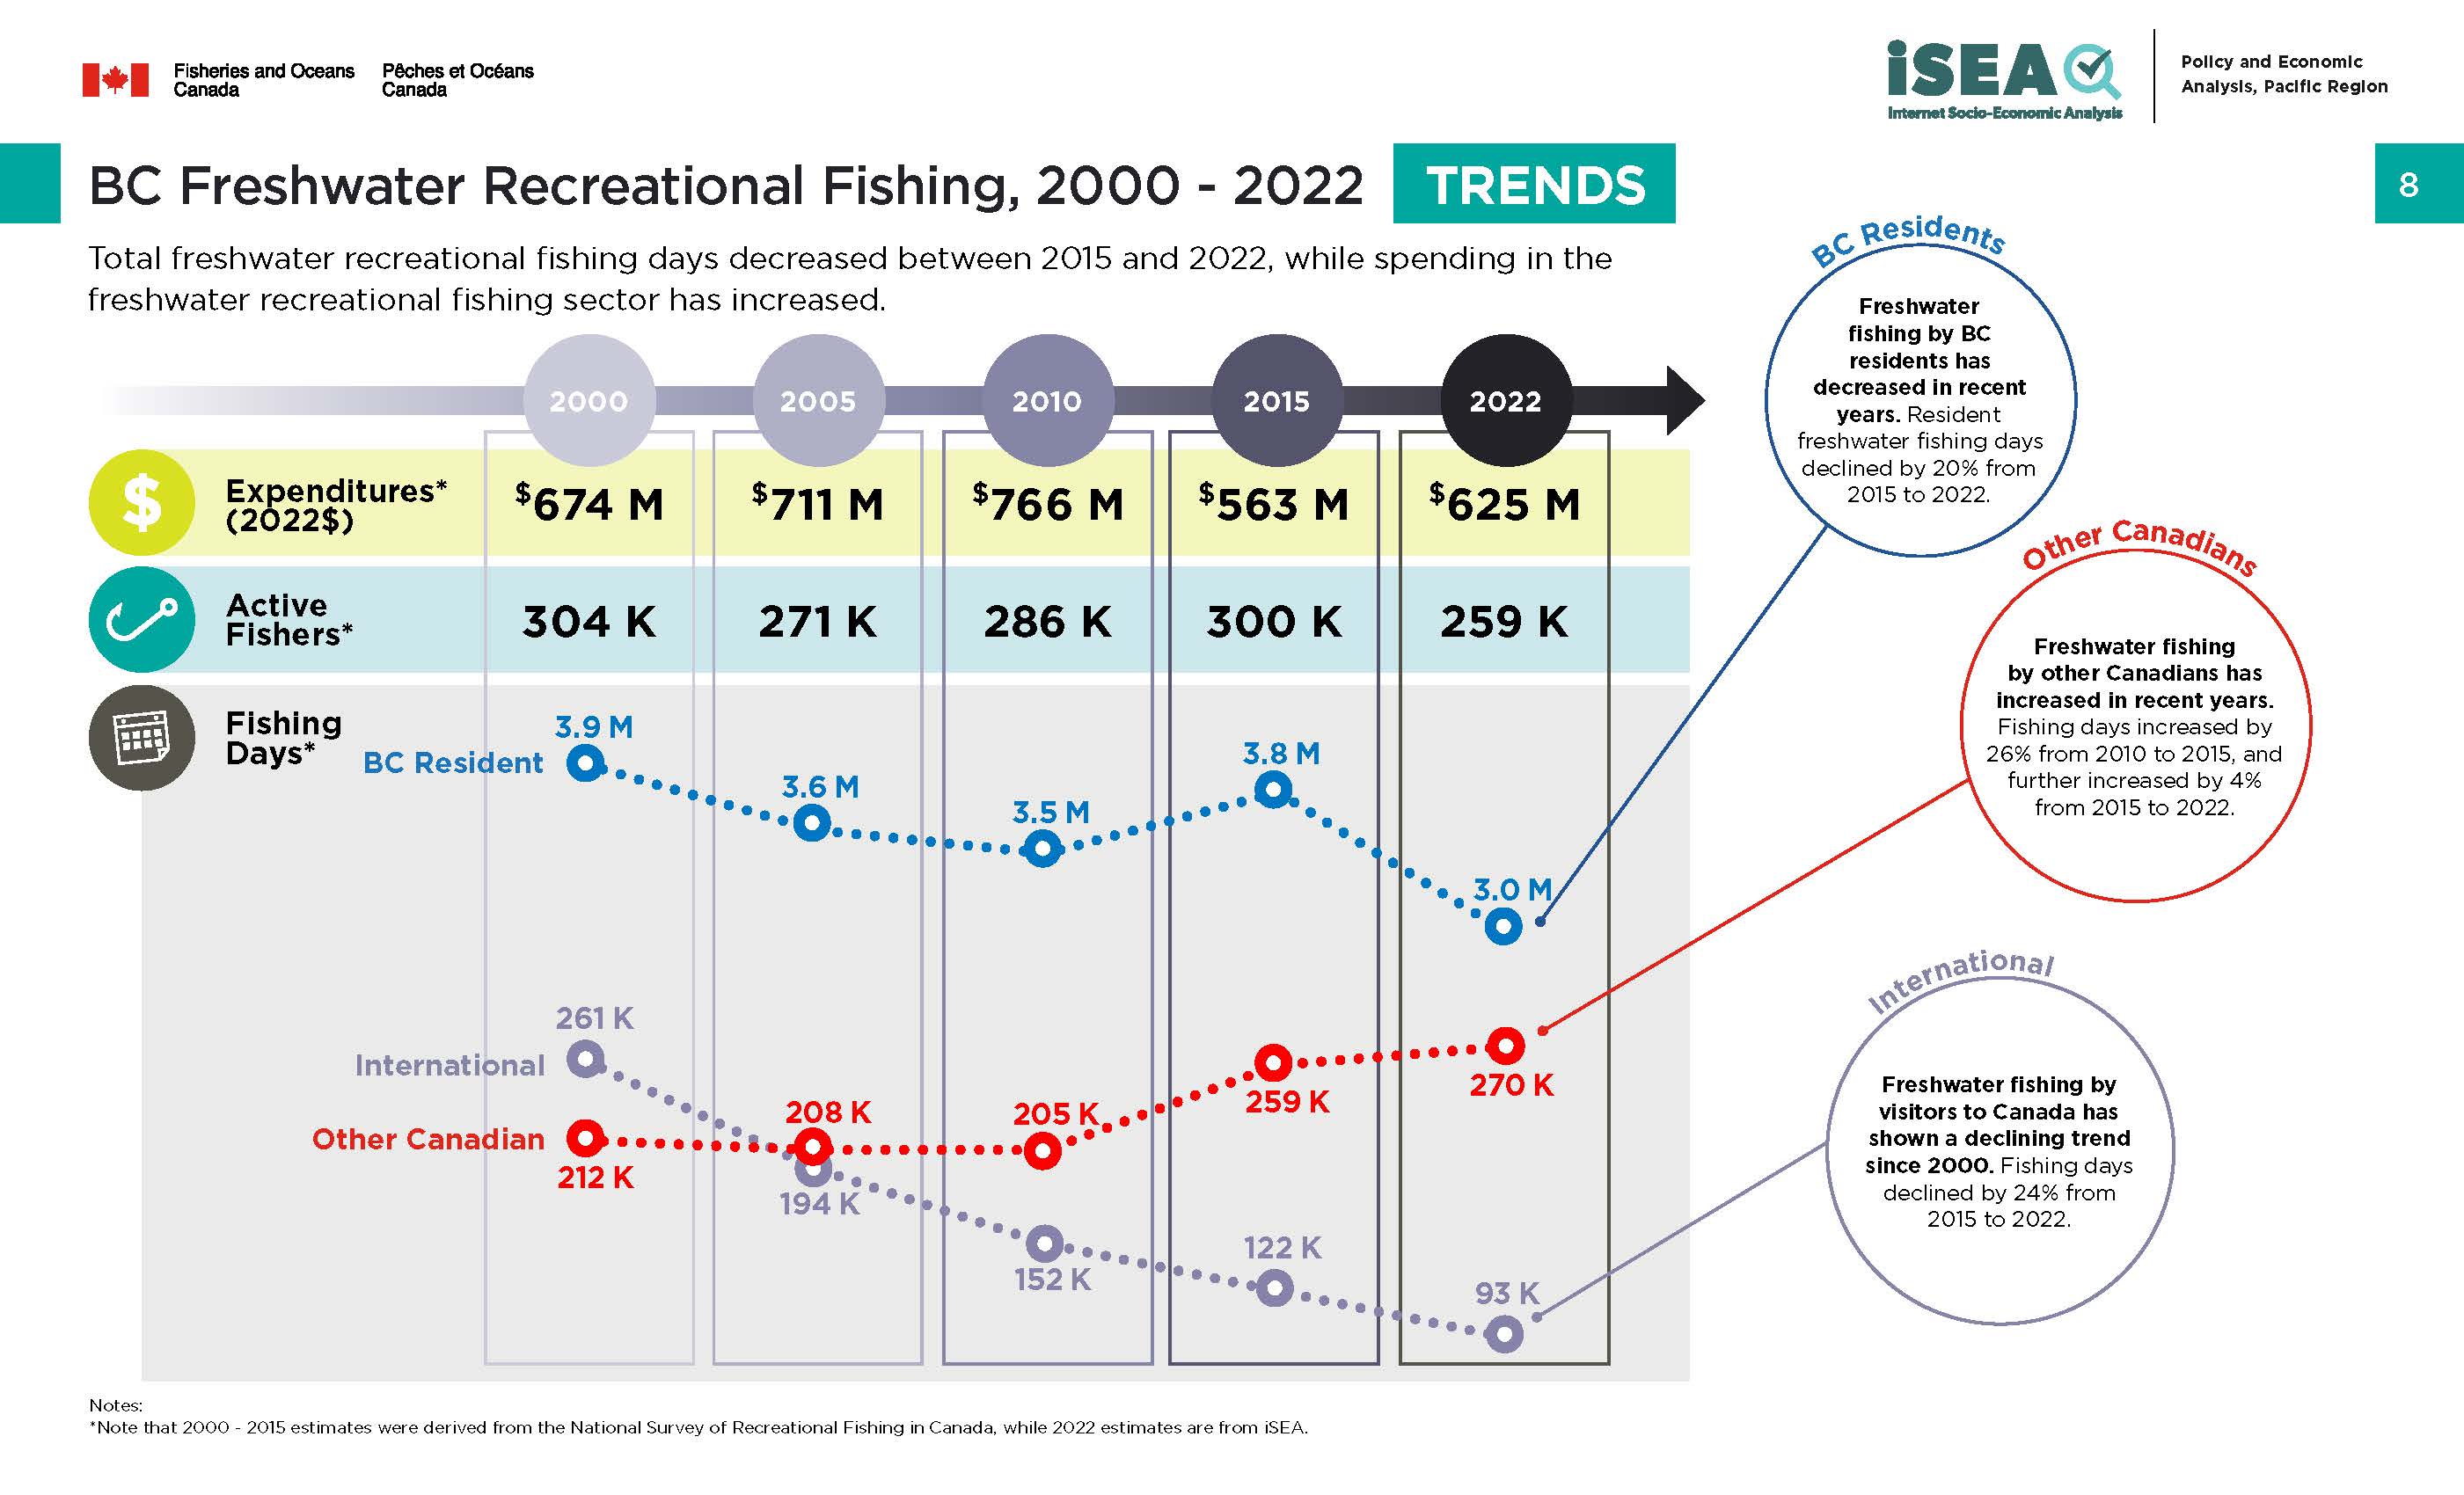 Photo: infographic of BC freshwater recreational fishing, 2000 to 2022 trends